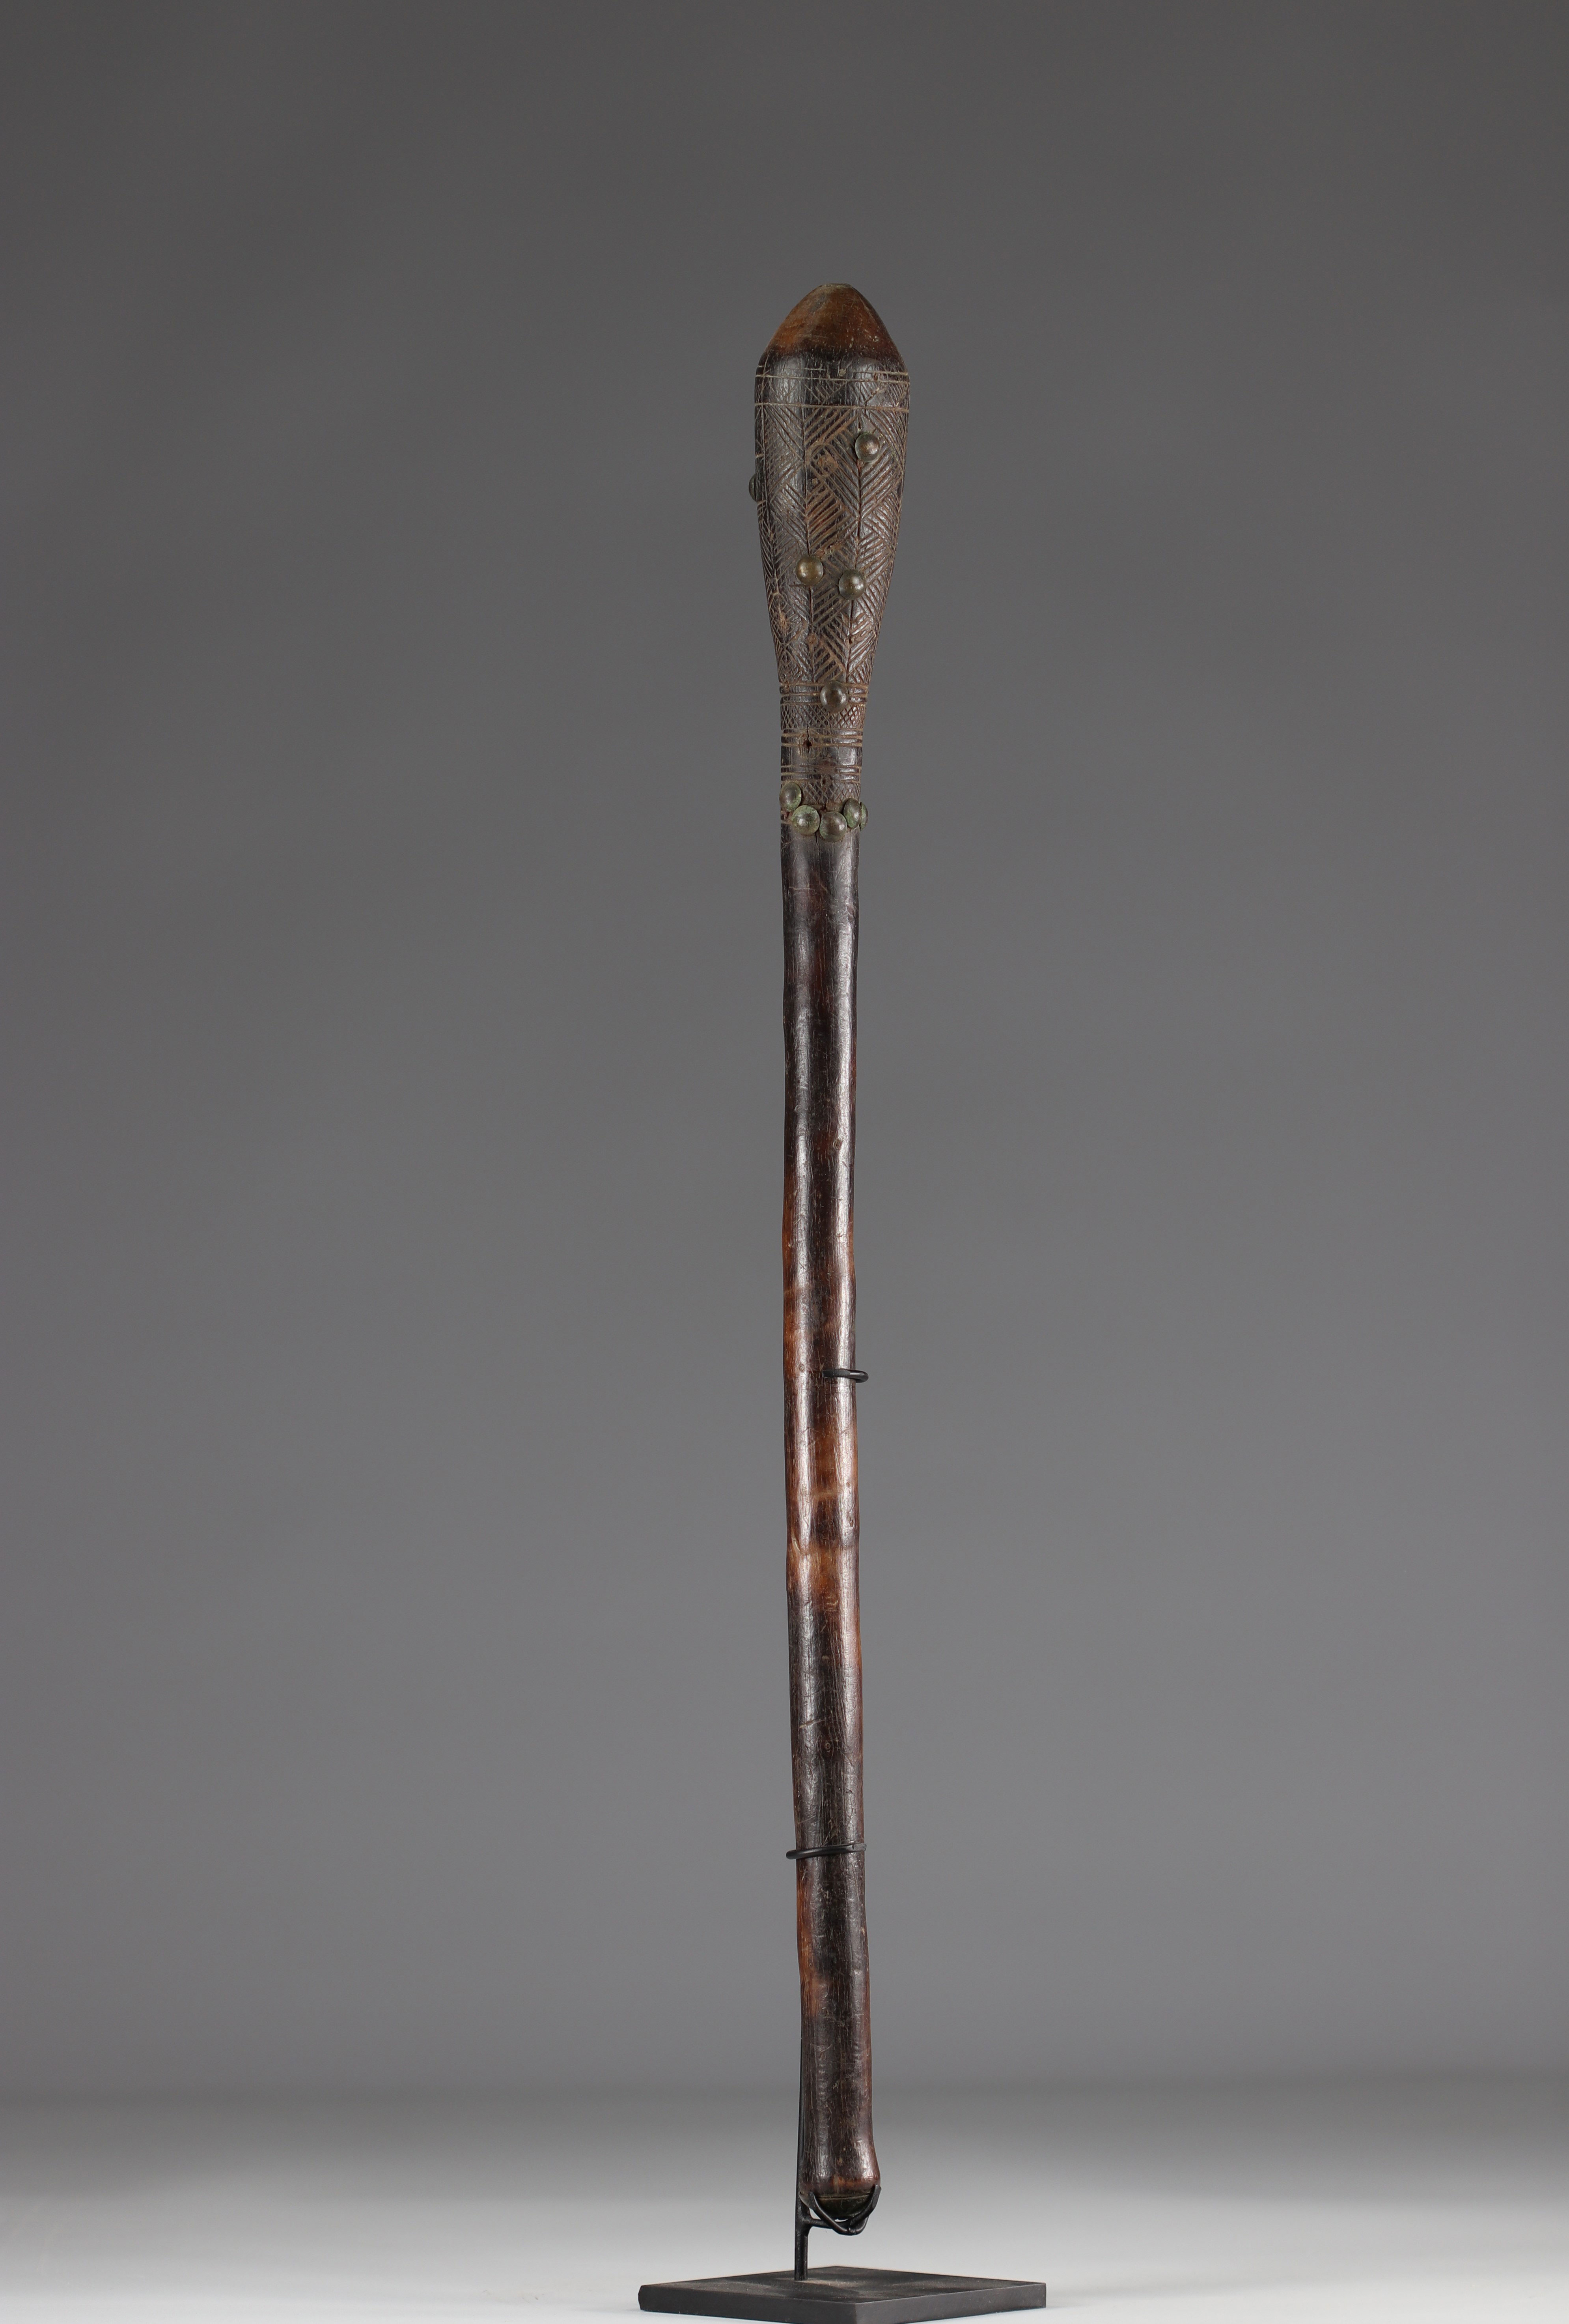 Tchokwe club - coll. private Belgian - early 20th century - DRC - Africa